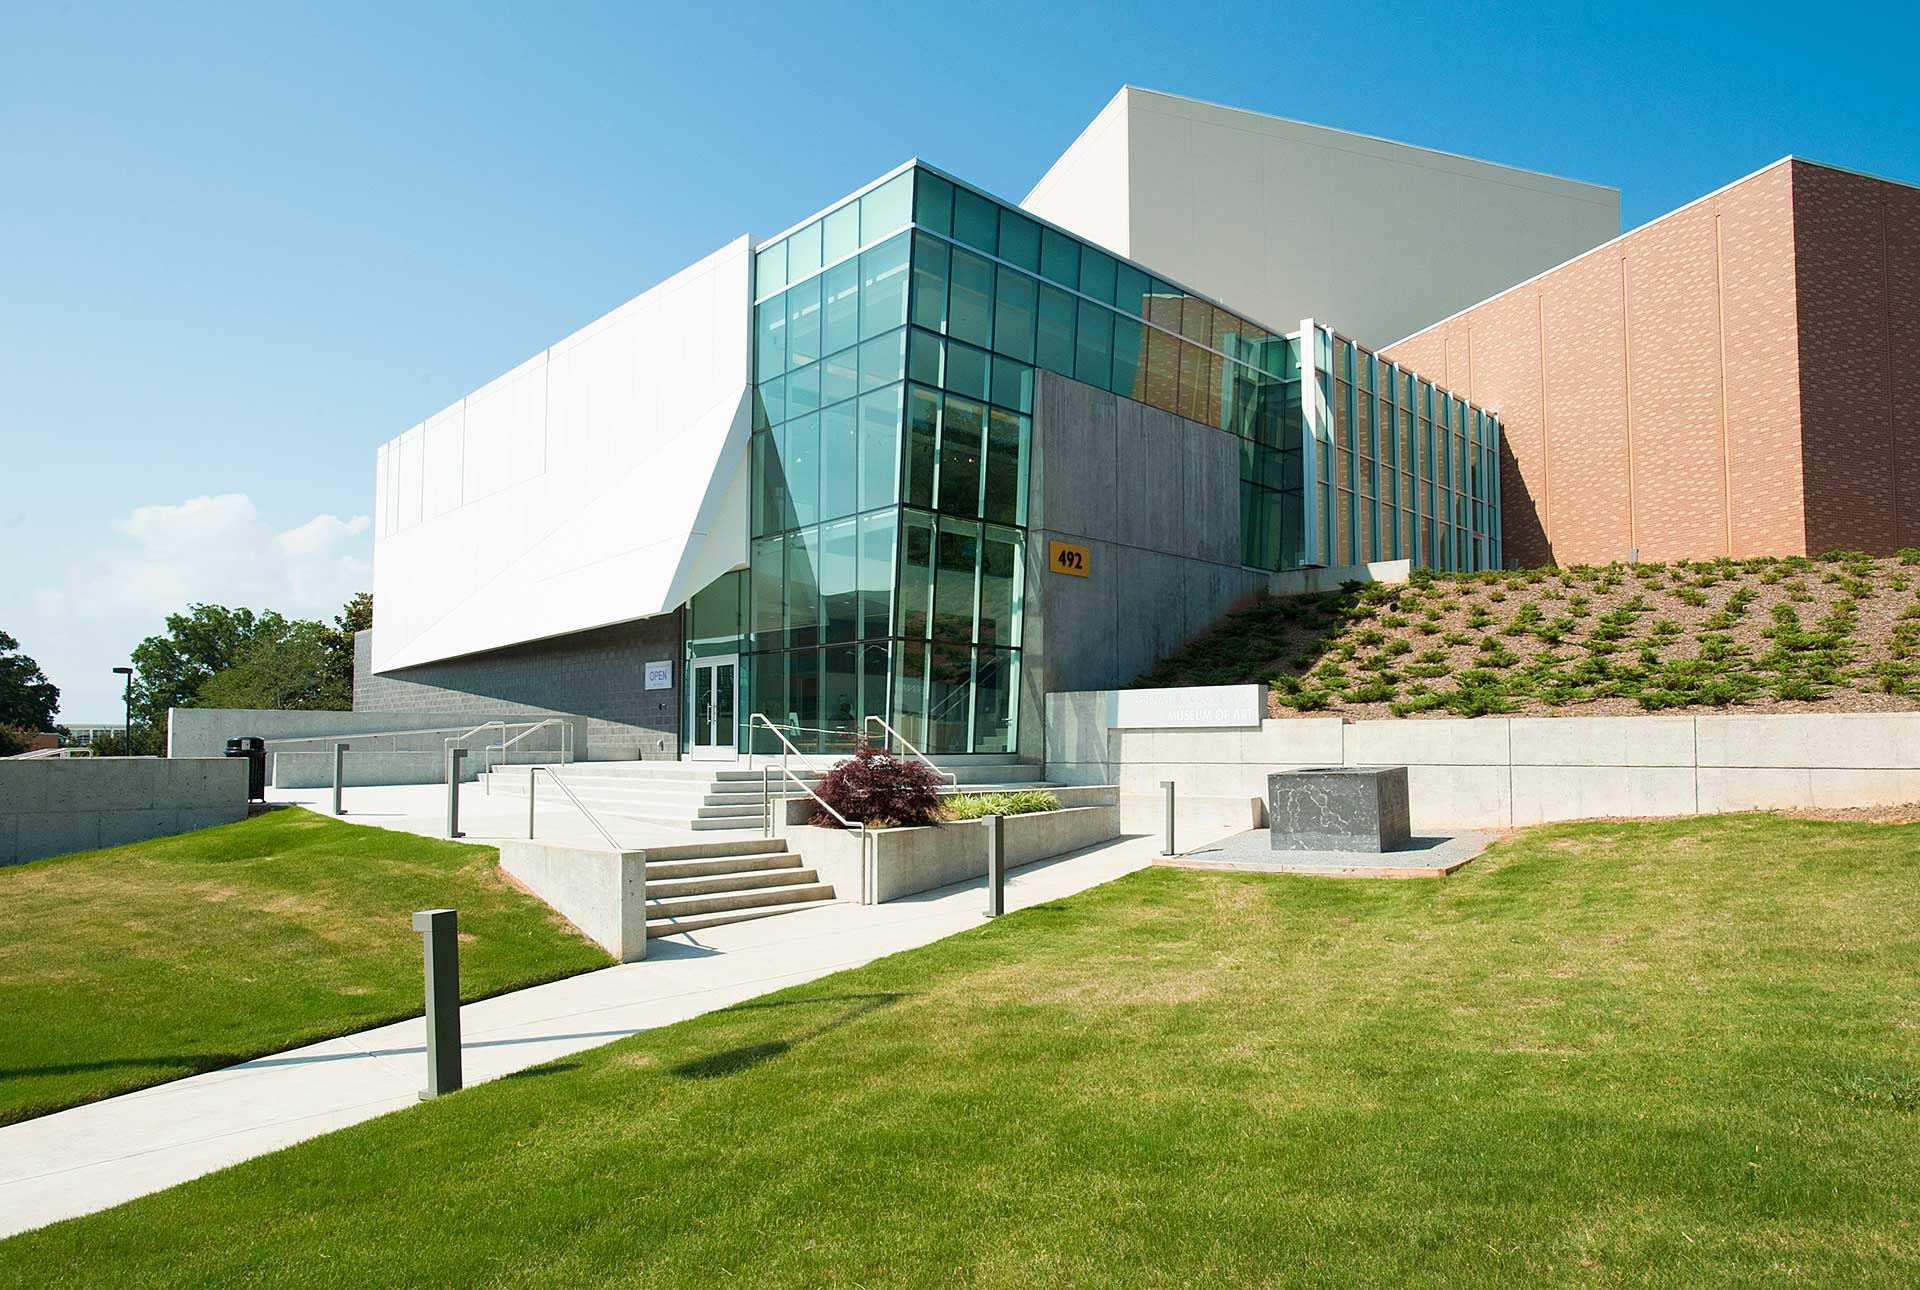 Donated works will become a part of the Zuckerman Museum of Art (pictured, above) permanent collection and will be utilized as a teaching tool.